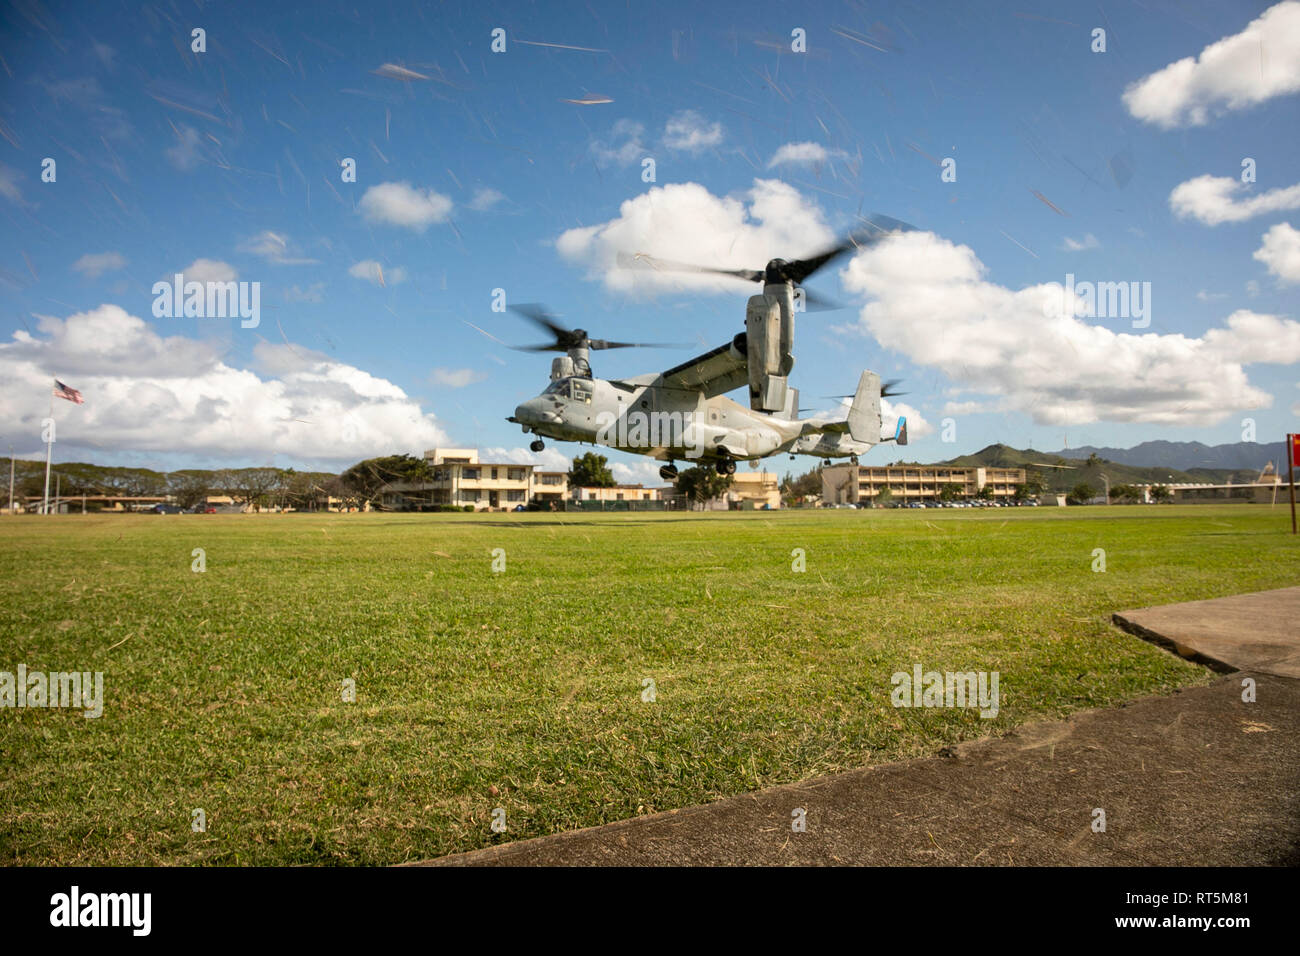 Two MV-22B Osprey tiltrotor helicopter assigned to Marine Medium Tiltrotor Squadron 268 take off from Landing Zone 216 during a downed aircraft scenario, Marine Corps Base Hawaii, Feb. 27, 2019. U.S. Marines with Weapons Company, 2nd Battalion, 3rd Marine Regiment and VMM-268 along with the A-10 Thunderbolt II attack aircraft assigned to 442nd Fighter Wing from Whiteman Air Force Base, Missour conduct training consisting of a simulated tactical recovery of aircraft personnel scenario and a combat search and rescue scenario. (U.S. Marine Corps photo by Sgt. Zachary Orr) Stock Photo